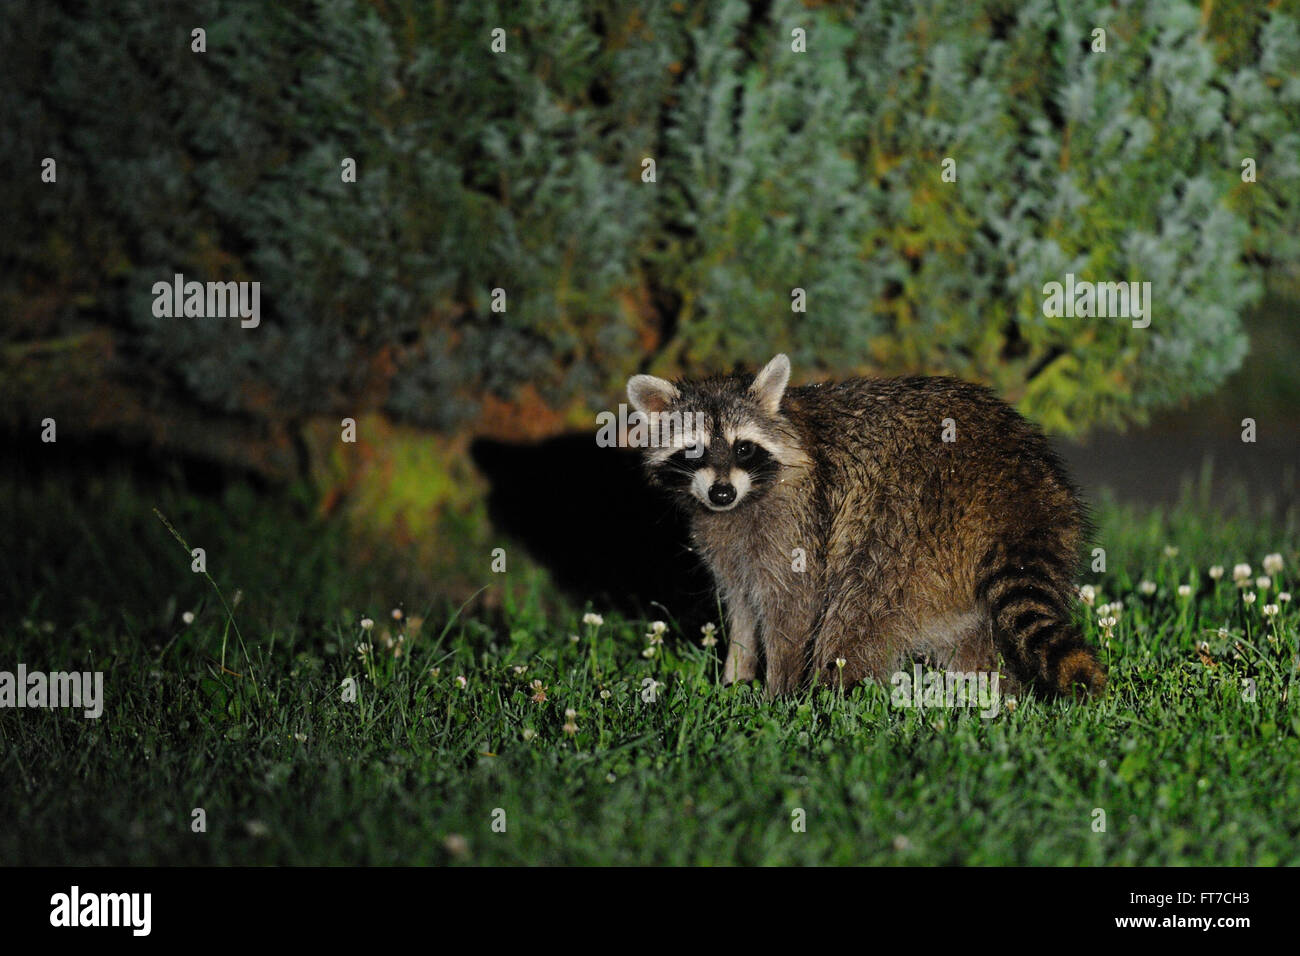 Surprised looking wild Common Raccoon / Waschbaer ( Procyon lotor ) stands in front of some bushes in a backyard. Stock Photo